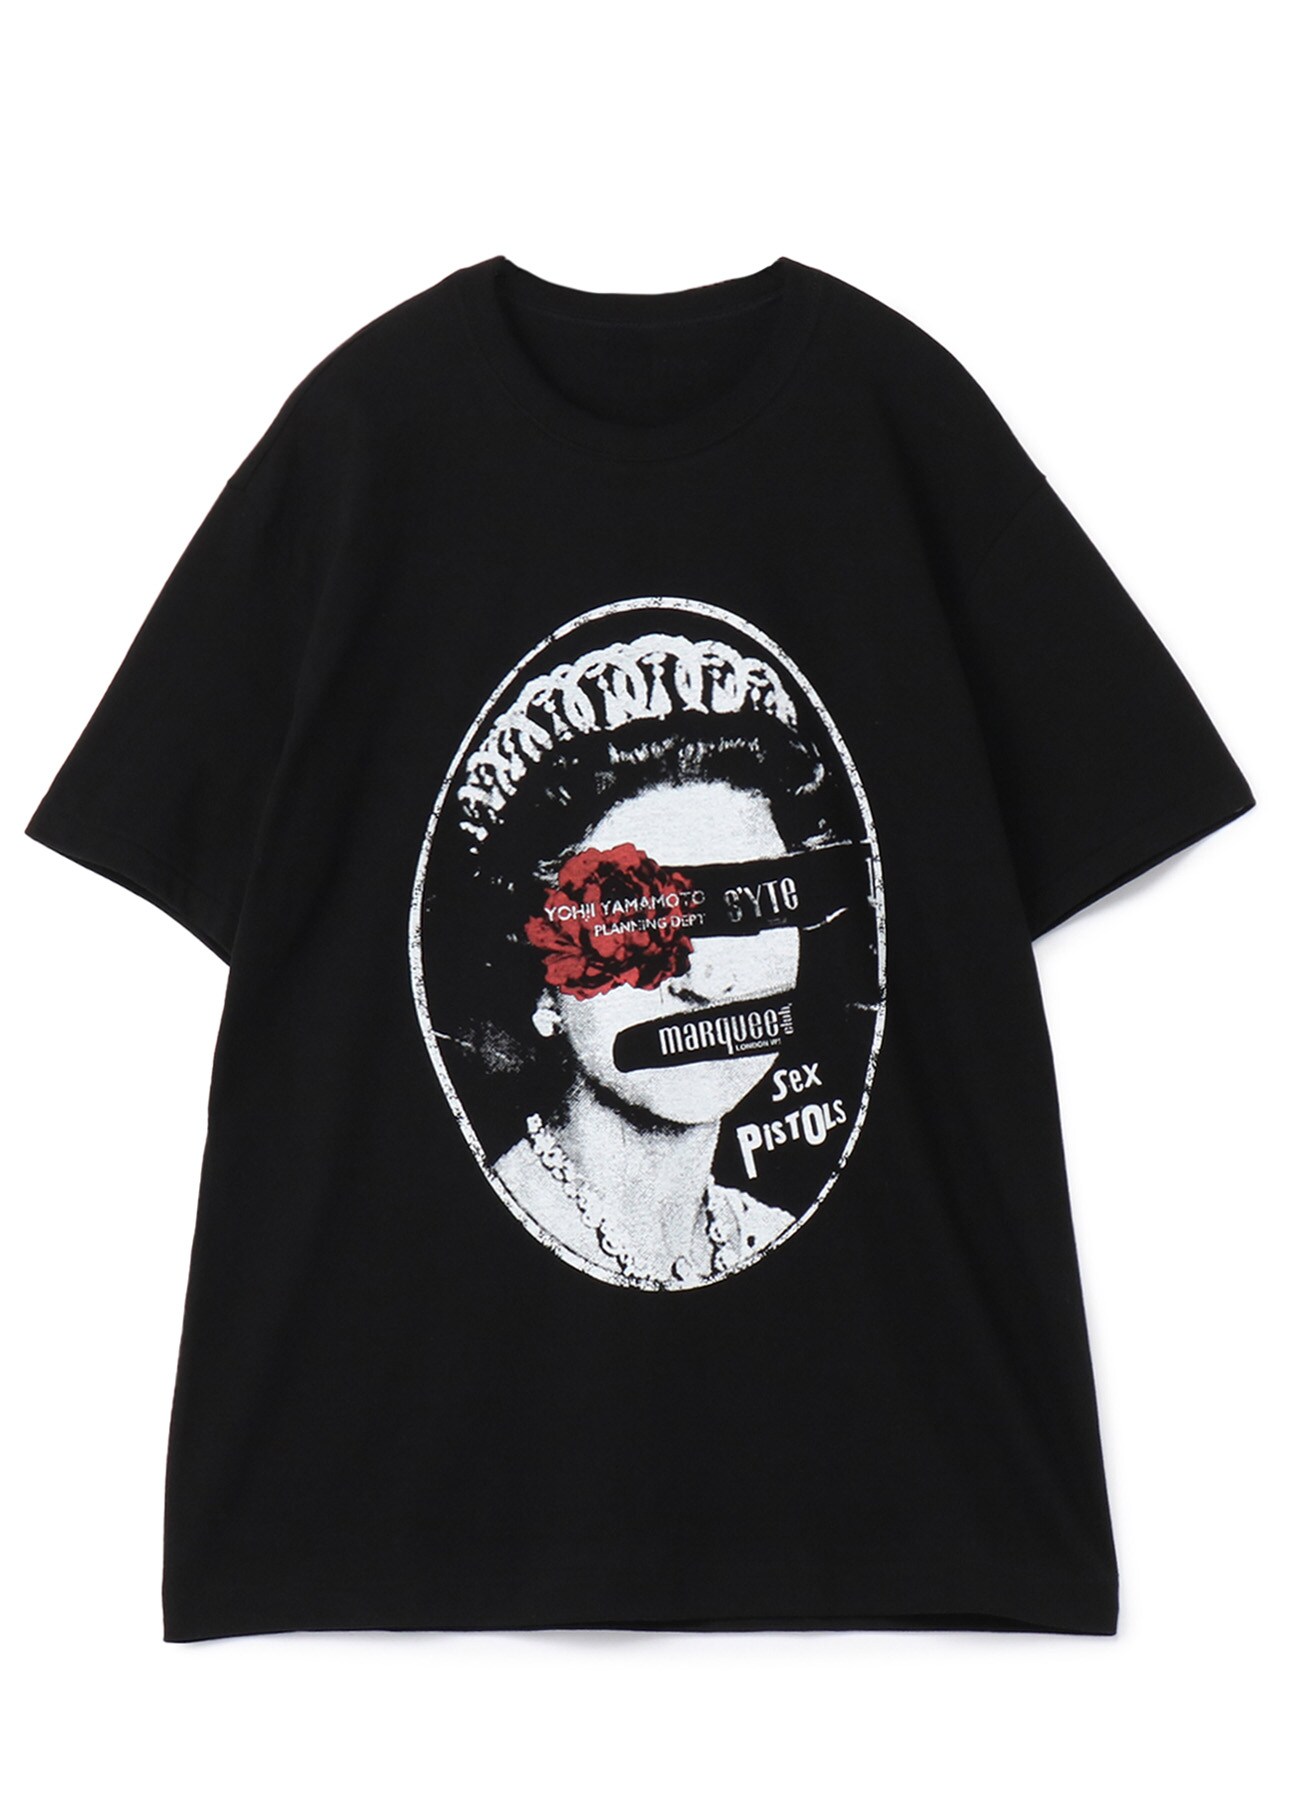 S’YTE × marquee club(c) Rose Queens T-shirt